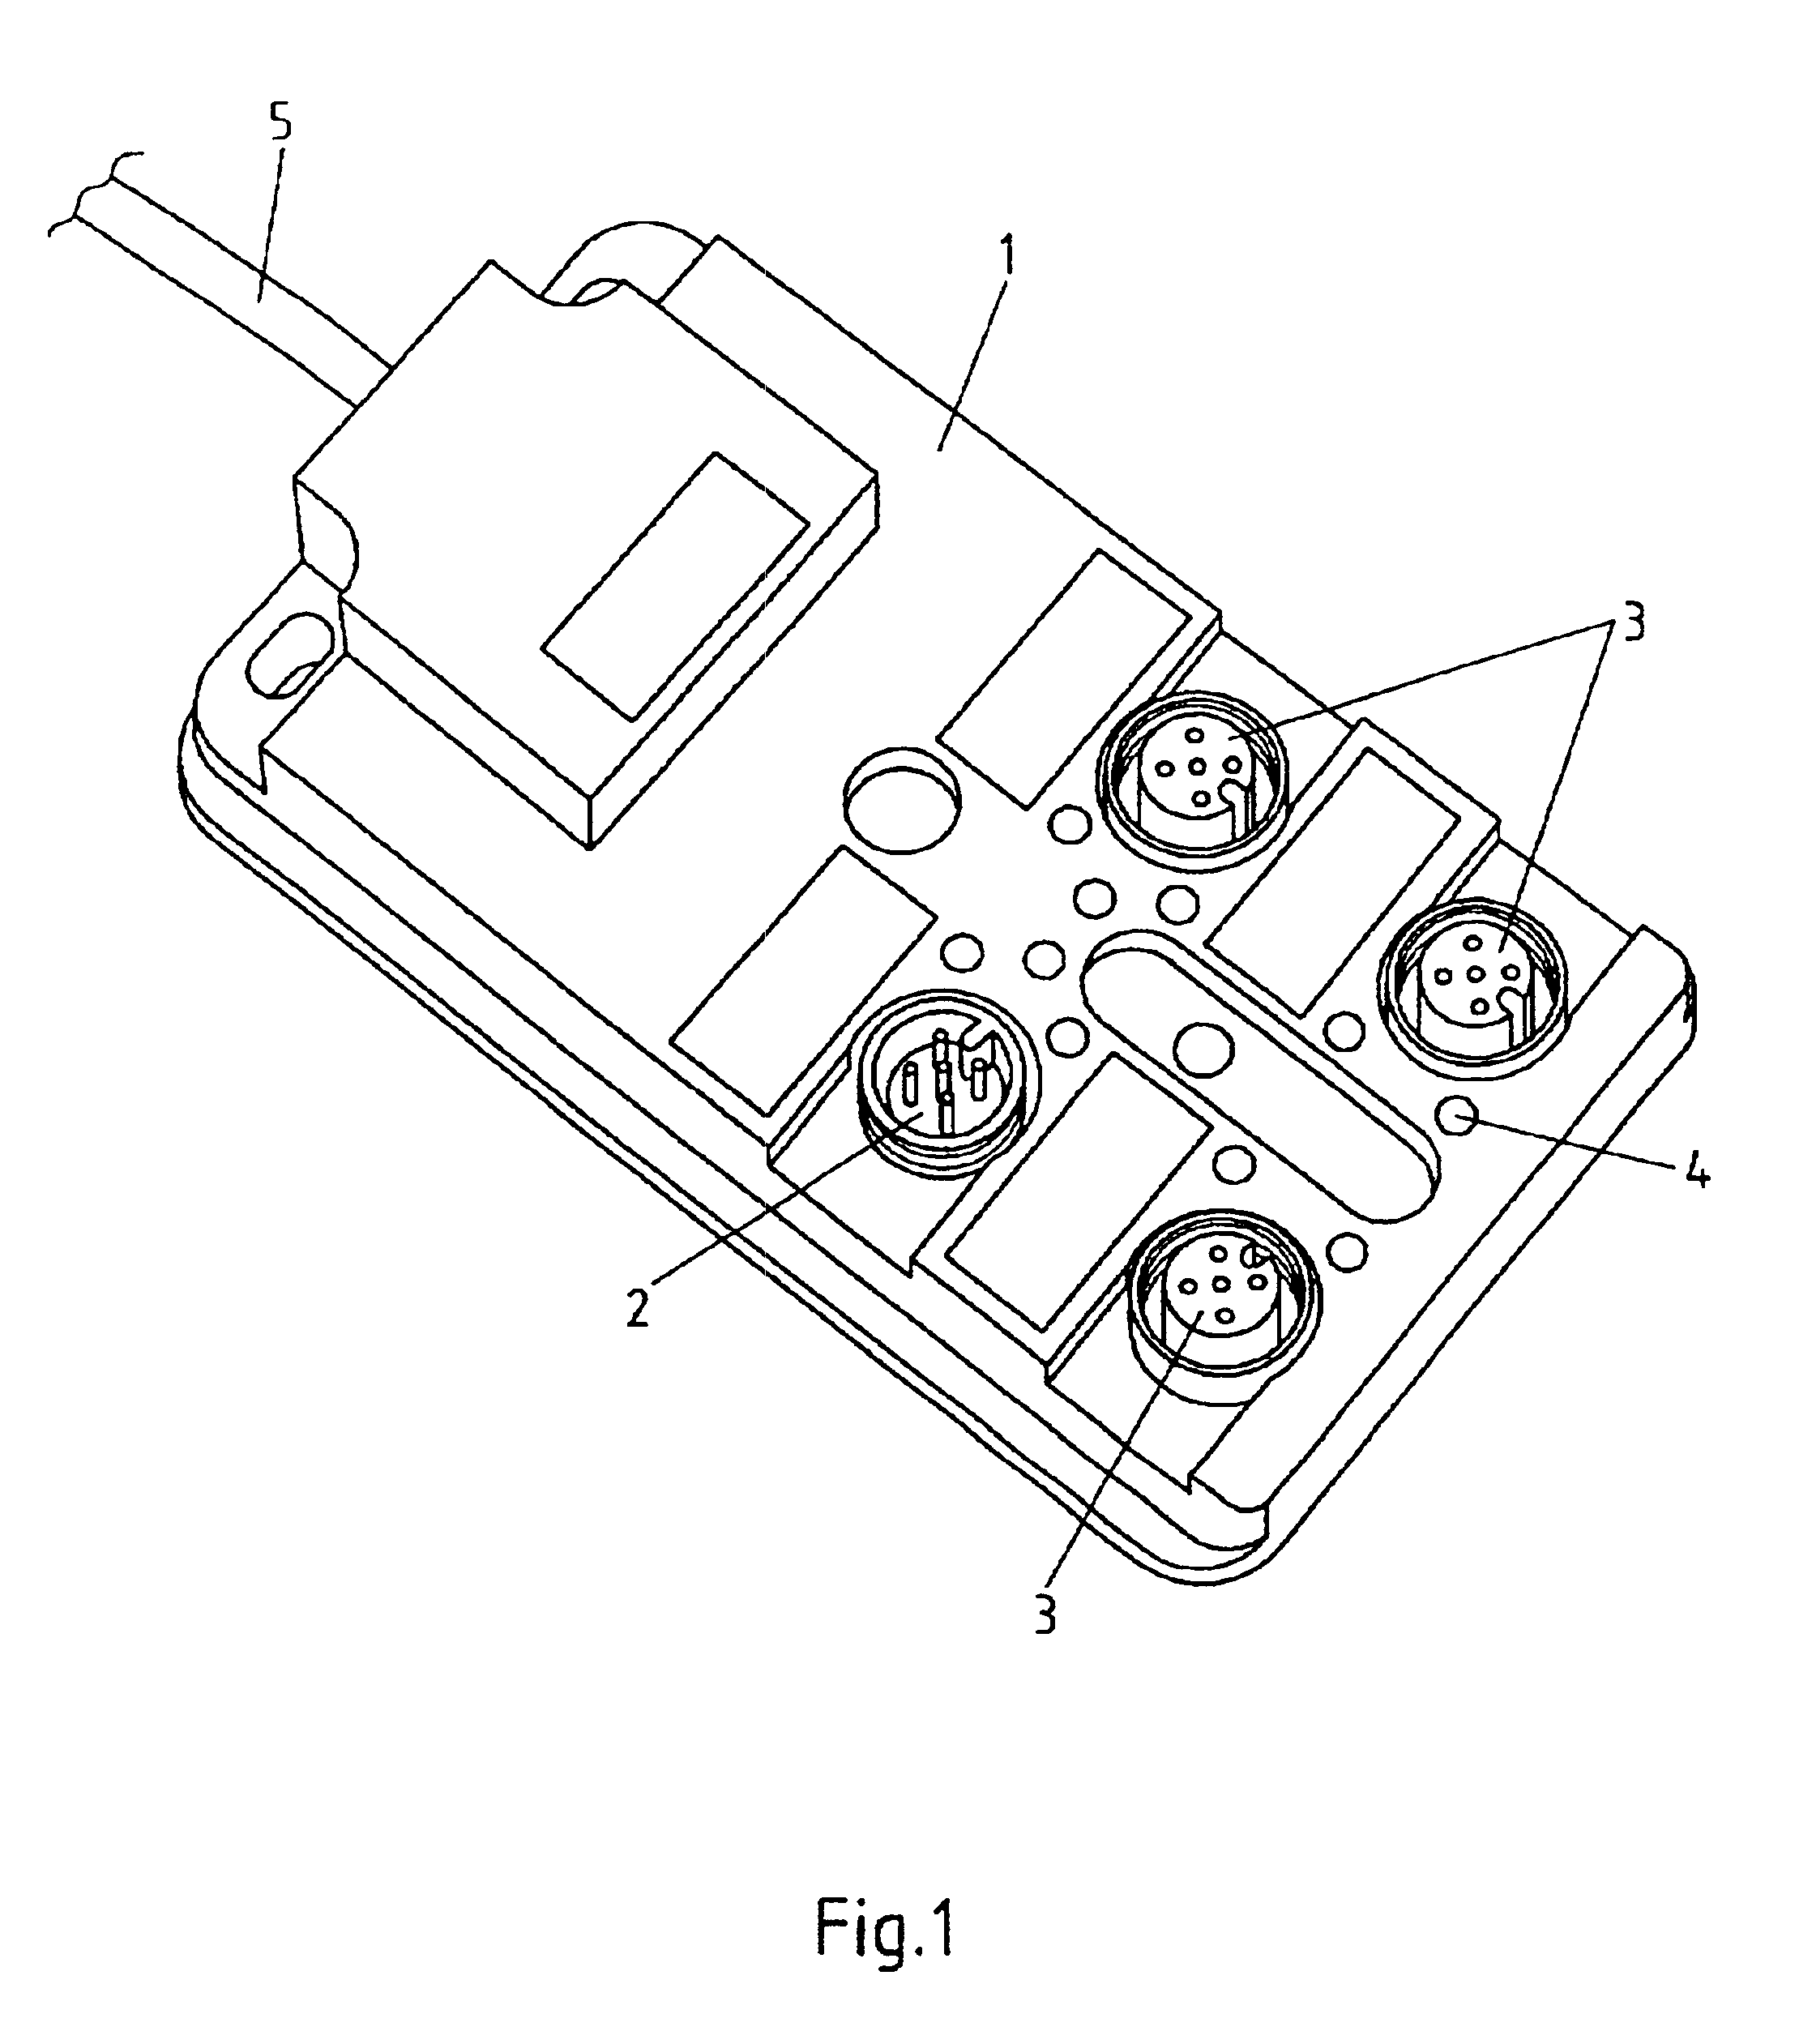 Connection system for connecting weighing cells